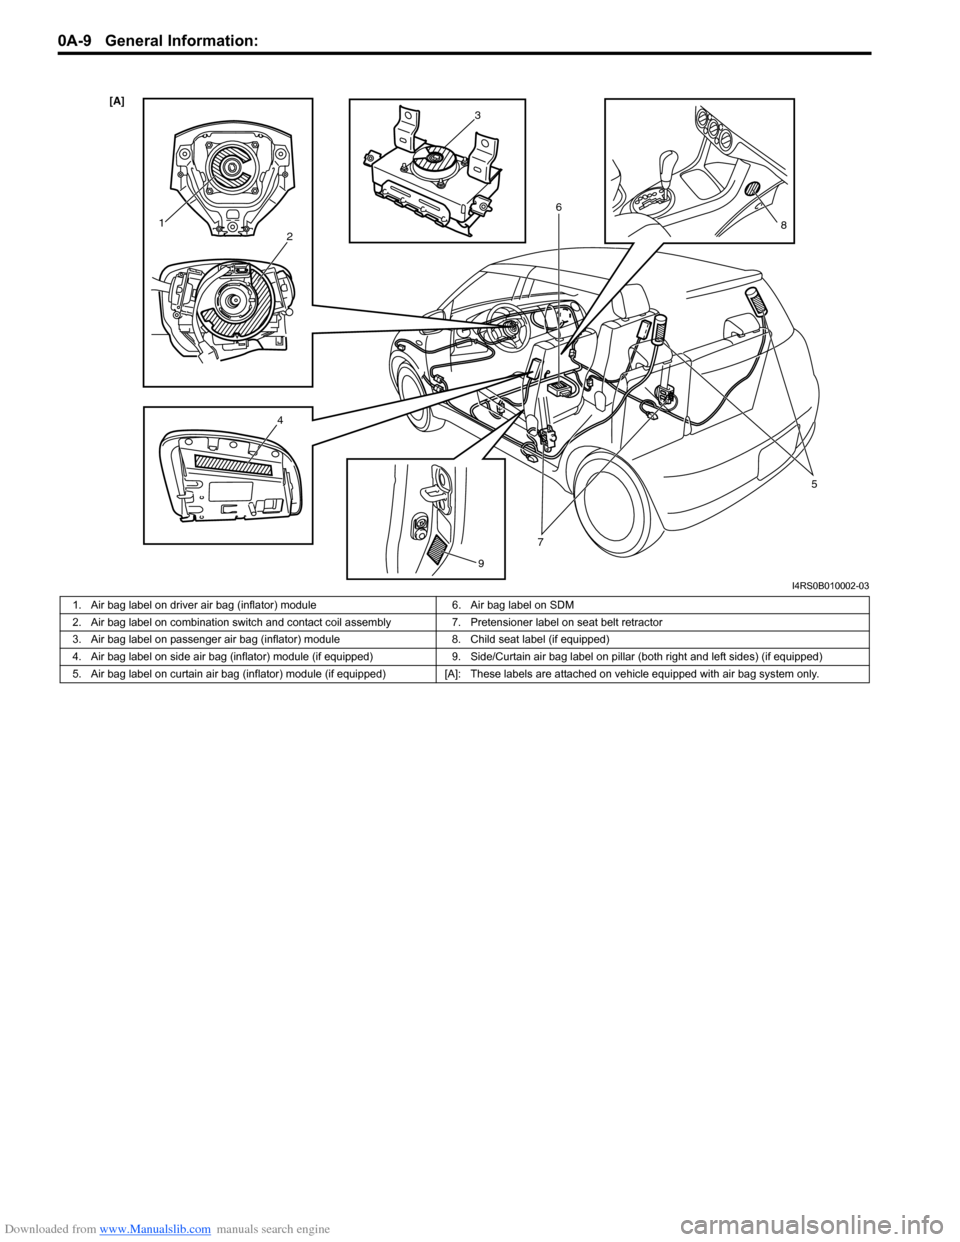 SUZUKI SWIFT 2008 2.G Service Workshop Manual Downloaded from www.Manualslib.com manuals search engine 0A-9 General Information: 
[A] 
12
4 5
6
7 8
9
3
I4RS0B010002-03
1. Air bag label on driver air bag (inflator) module 6. Air bag label on SDM
2